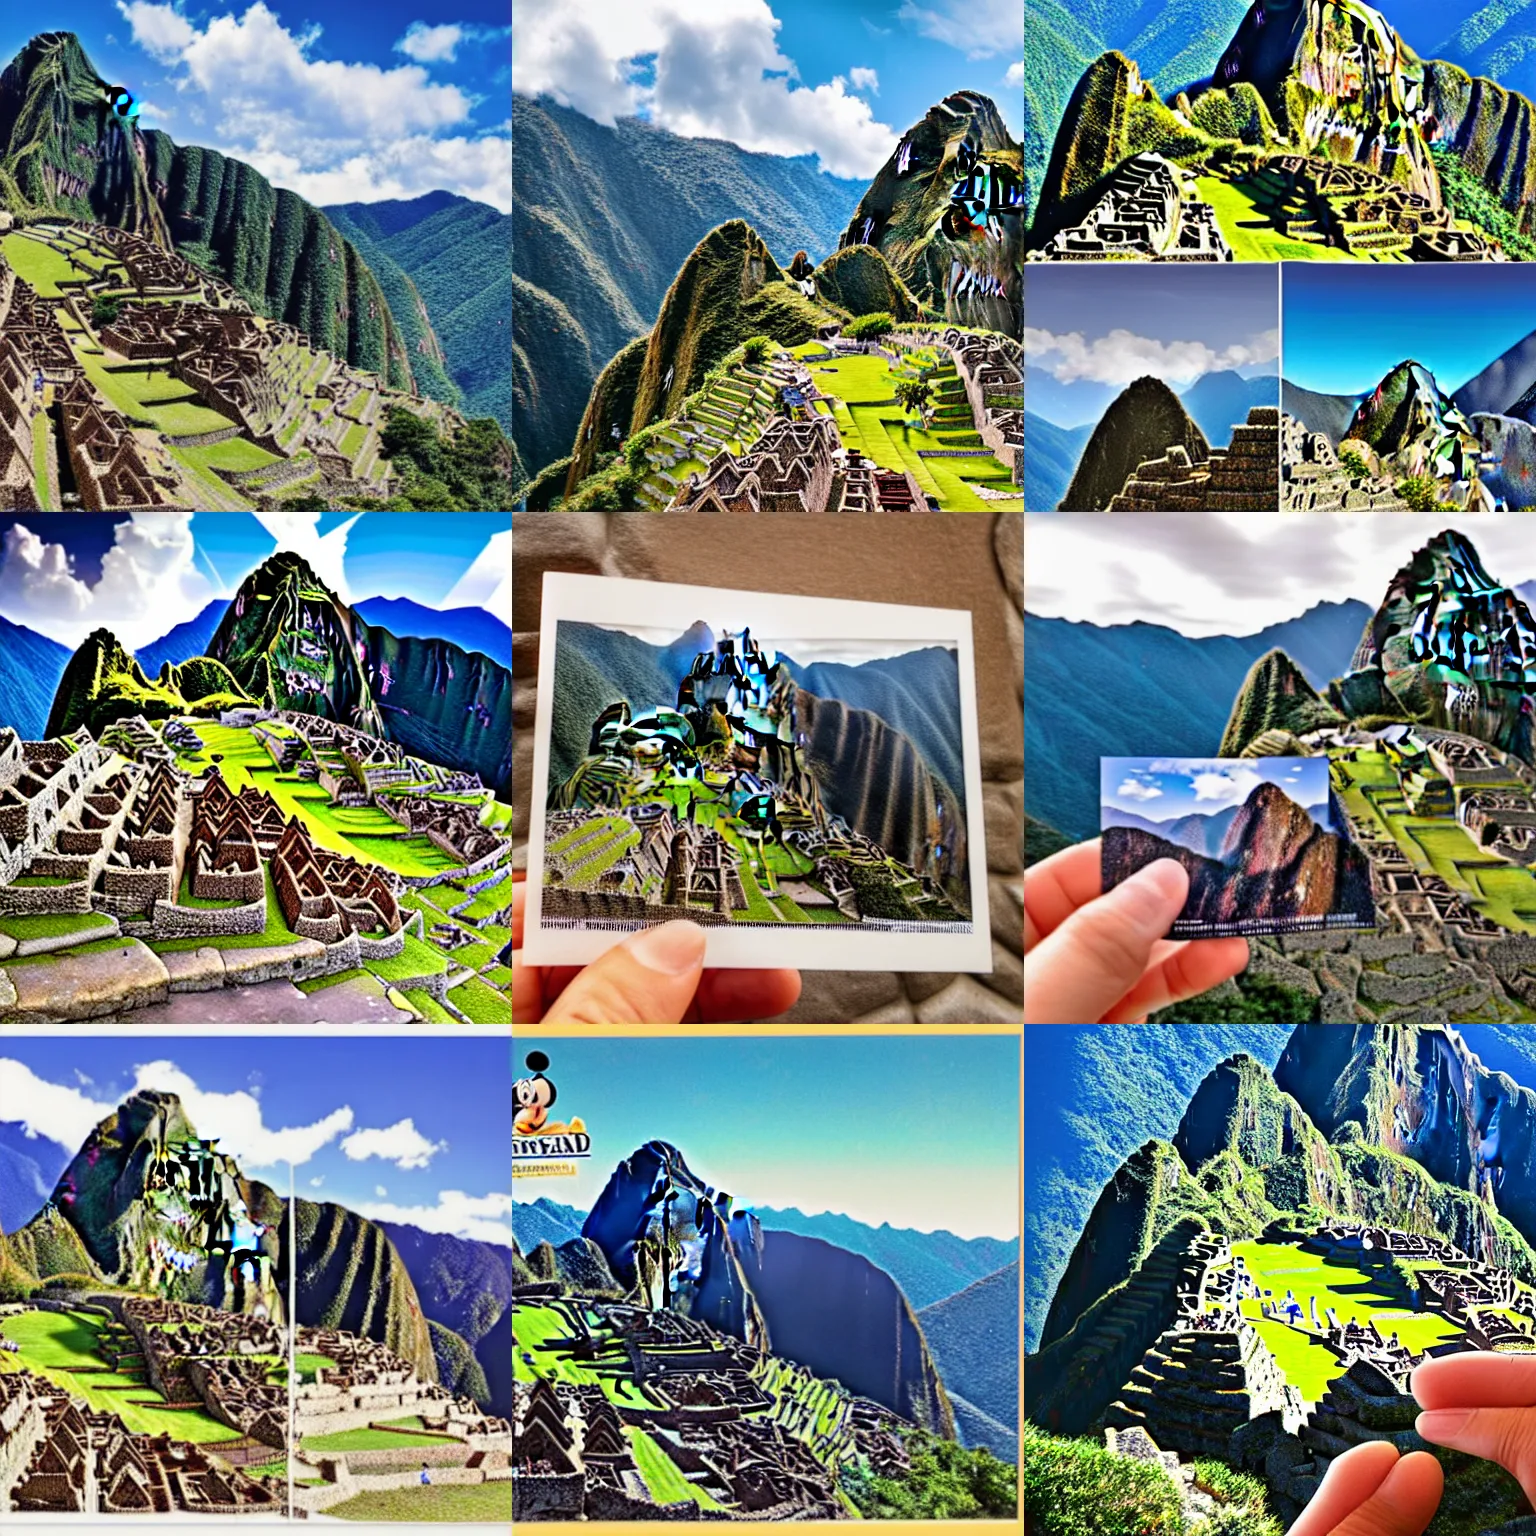 Prompt: a postcard from disneyland machu picchu with a fancy castle, mickey mouse ears, and high altitude mountain scenery, souvenir postcard slightly bent from going through the mail